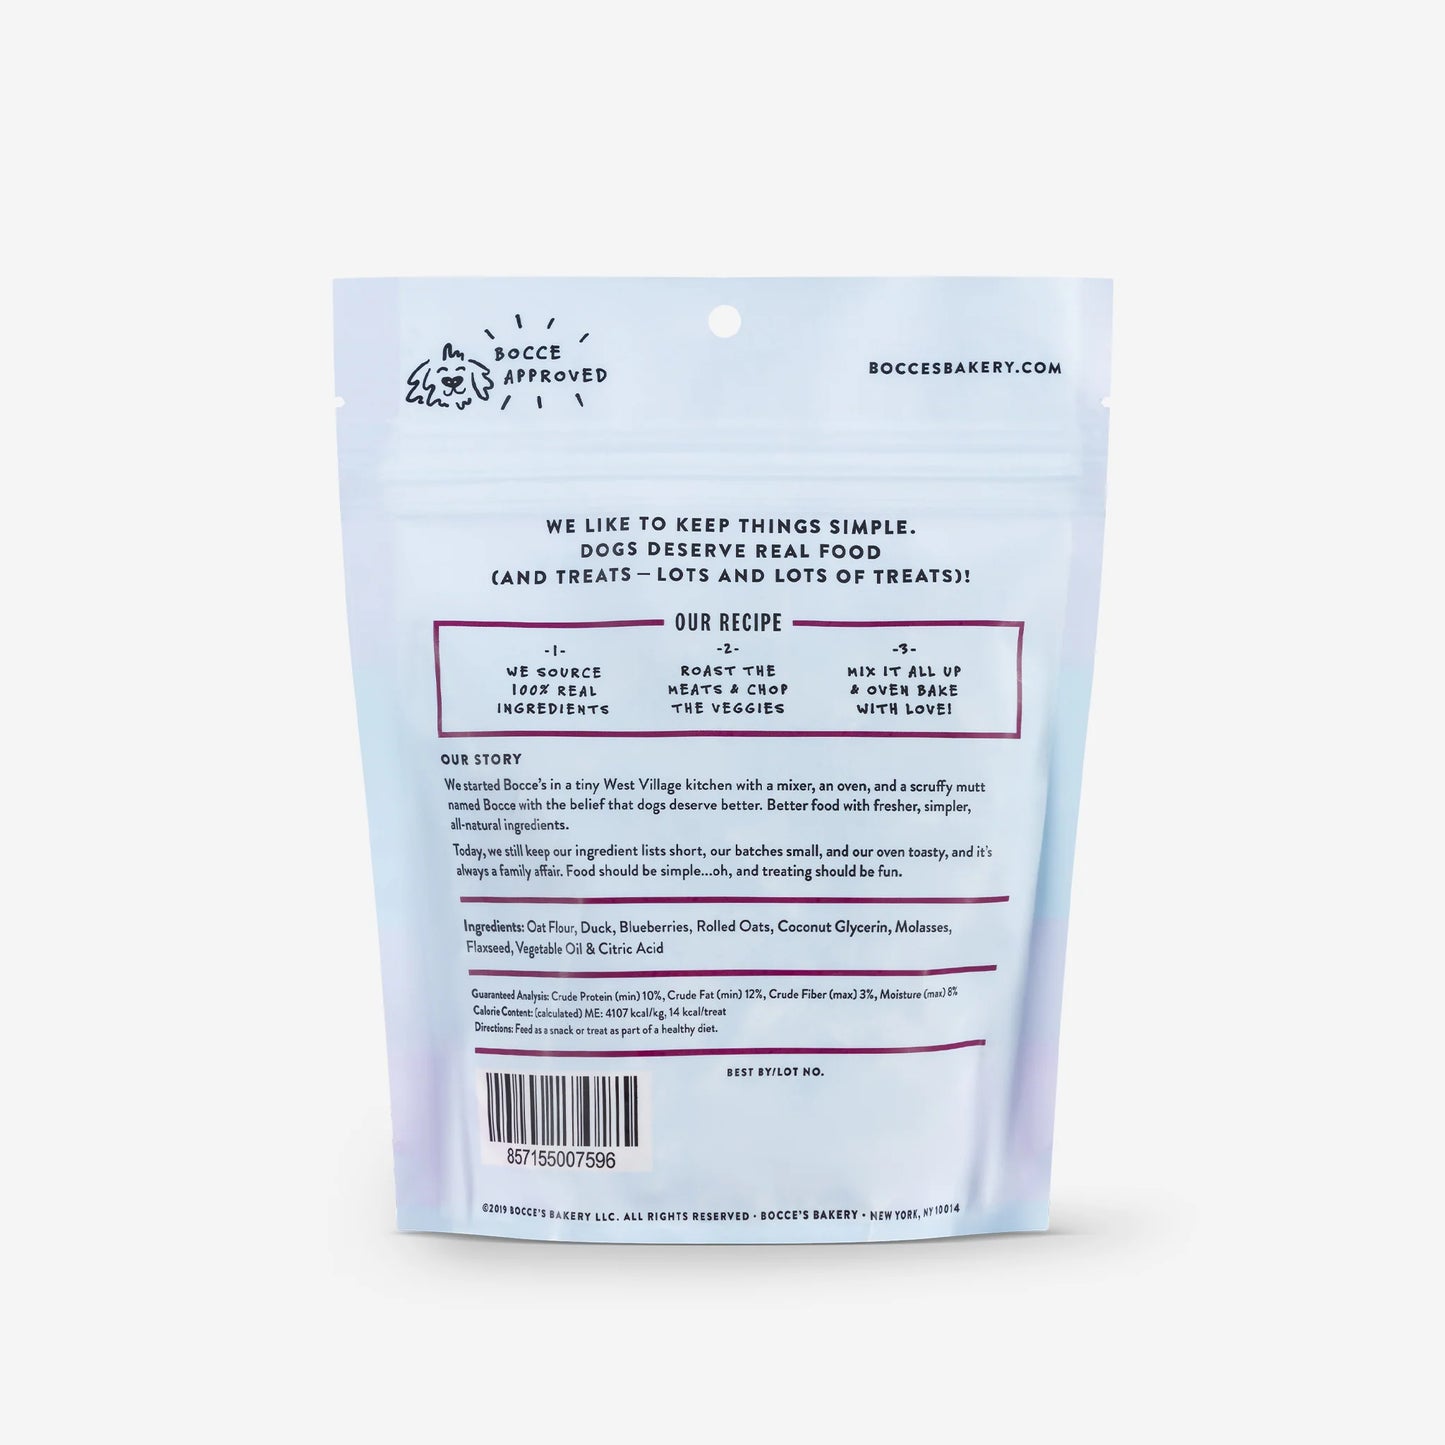 A white plastic bag with limited ingredients containing Bocce's Bakery: Quack, Quack, Quack Soft & Chewy Treats (6oz/170g) from Your Whole Dog.